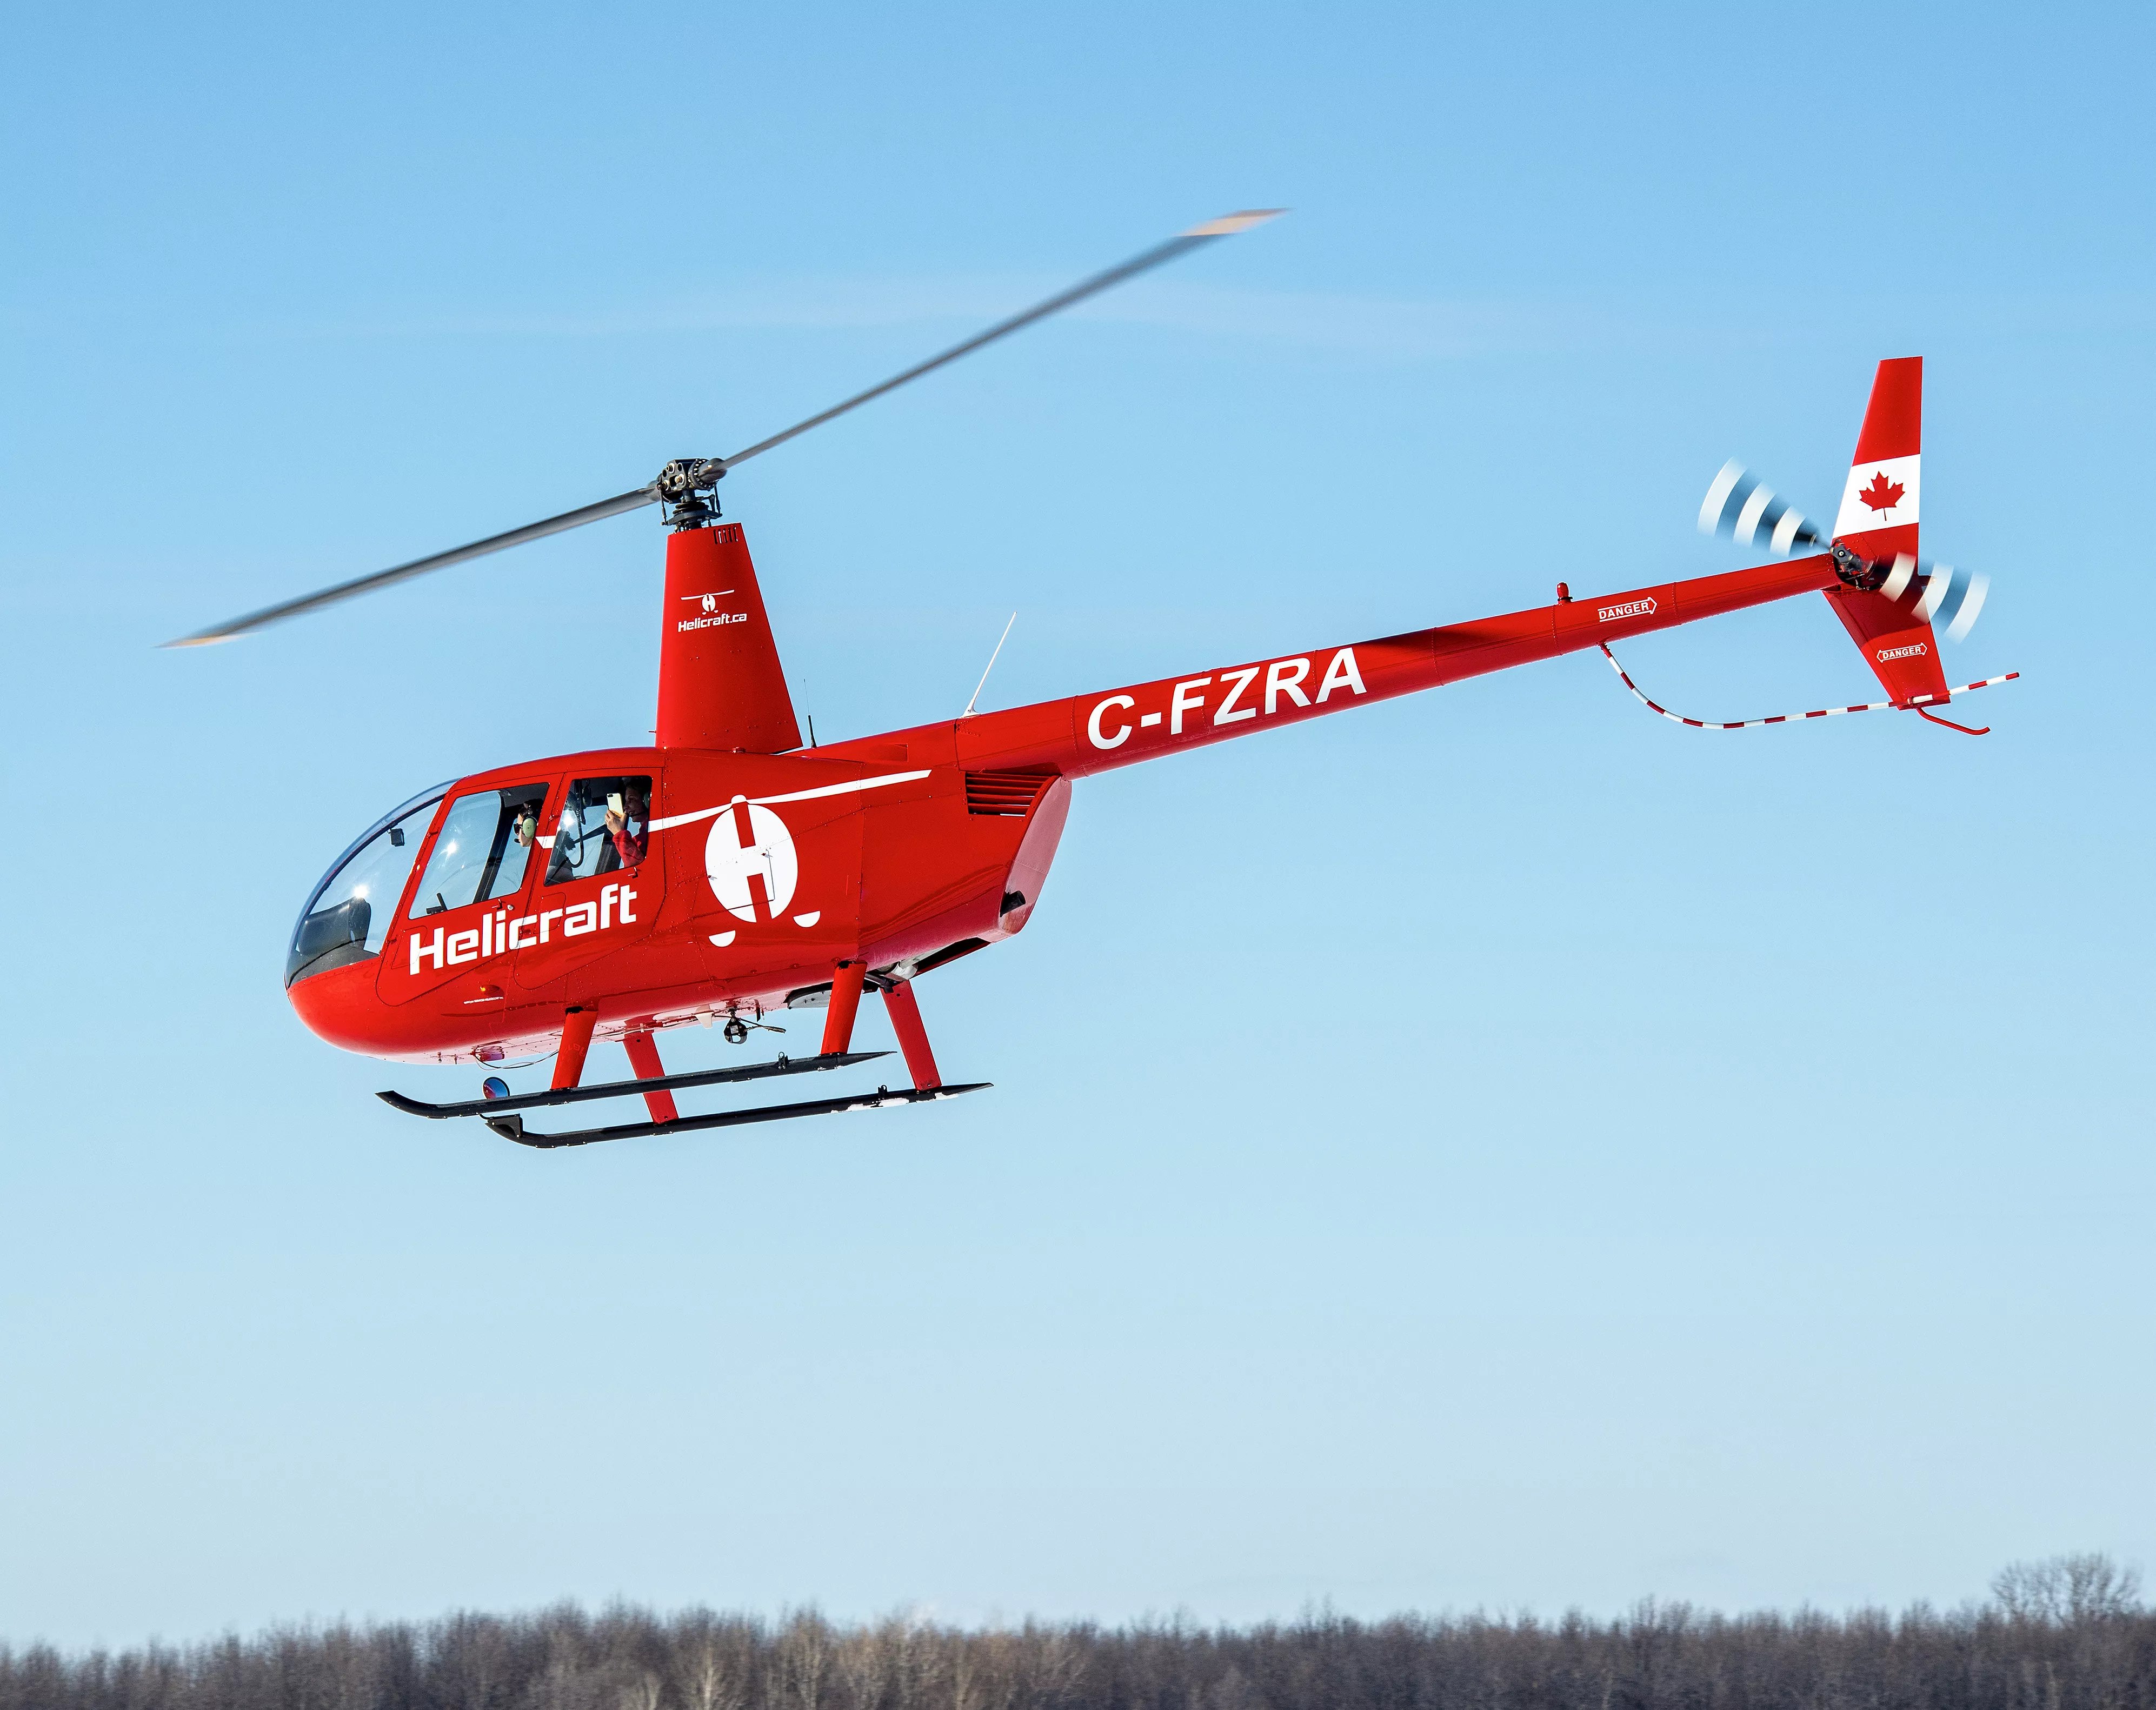 Helicraft - Helicopter Flight School in Canada, North America | Helicopter Sport - Rated 1.2